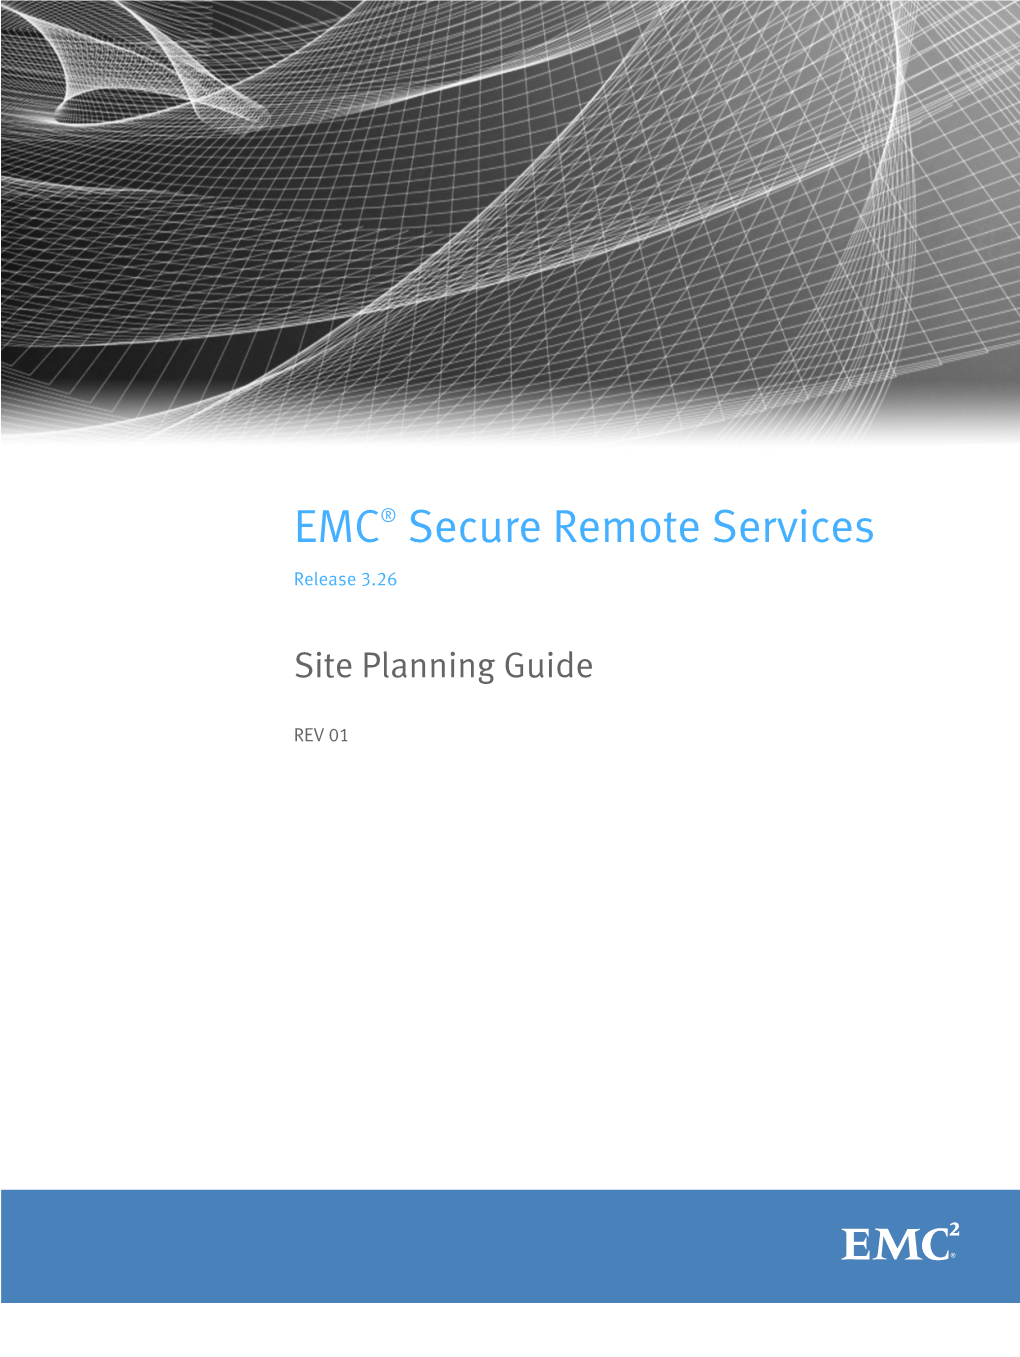 EMC Secure Remote Services 3.18 Site Planning Guide